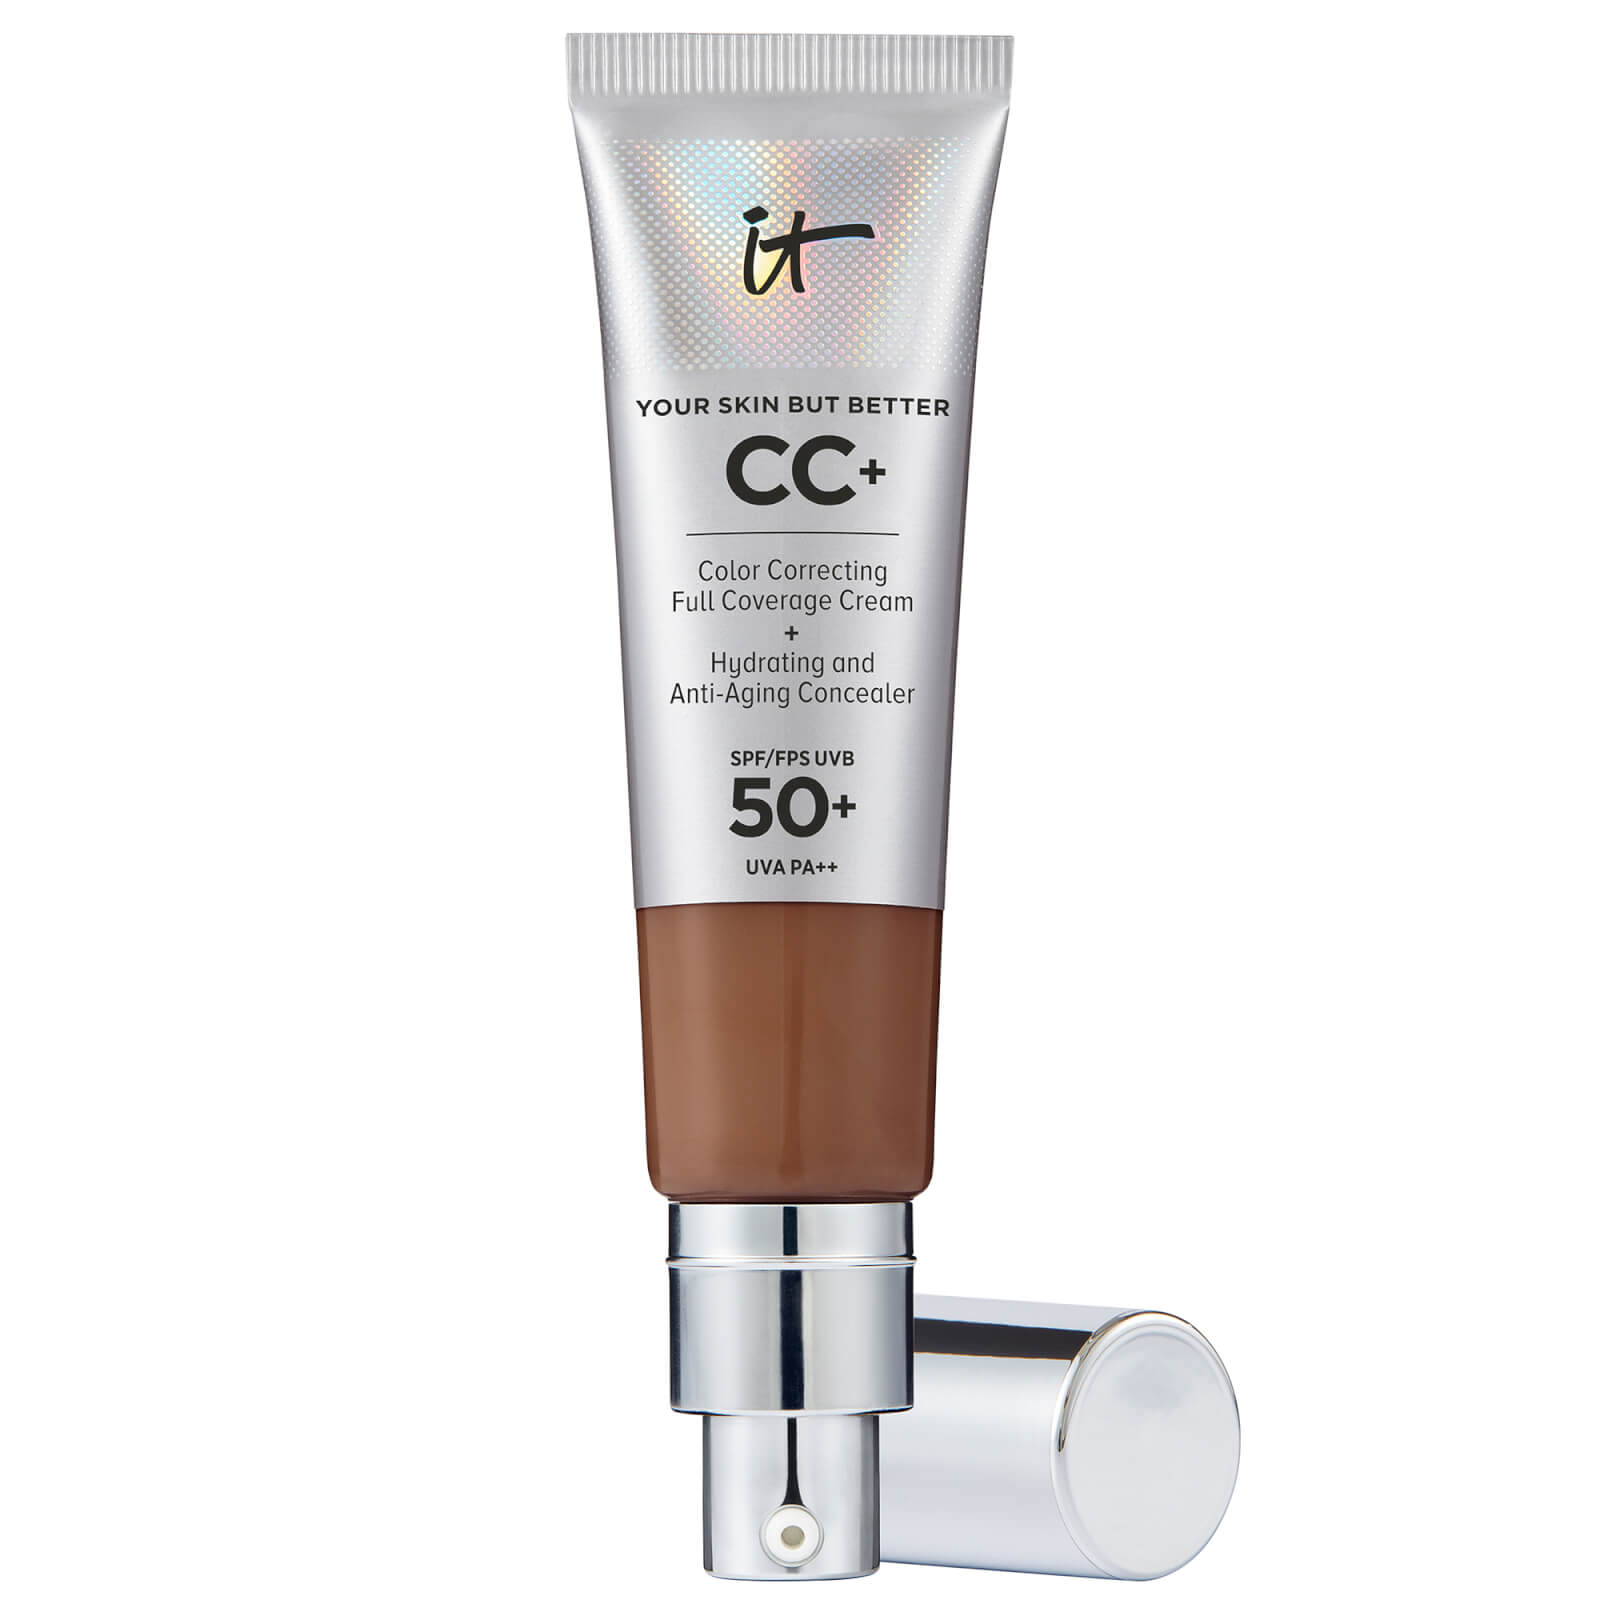 IT Cosmetics Your Skin But Better CC+ Cream with SPF50 32ml (Various Shades) - Deep Honey